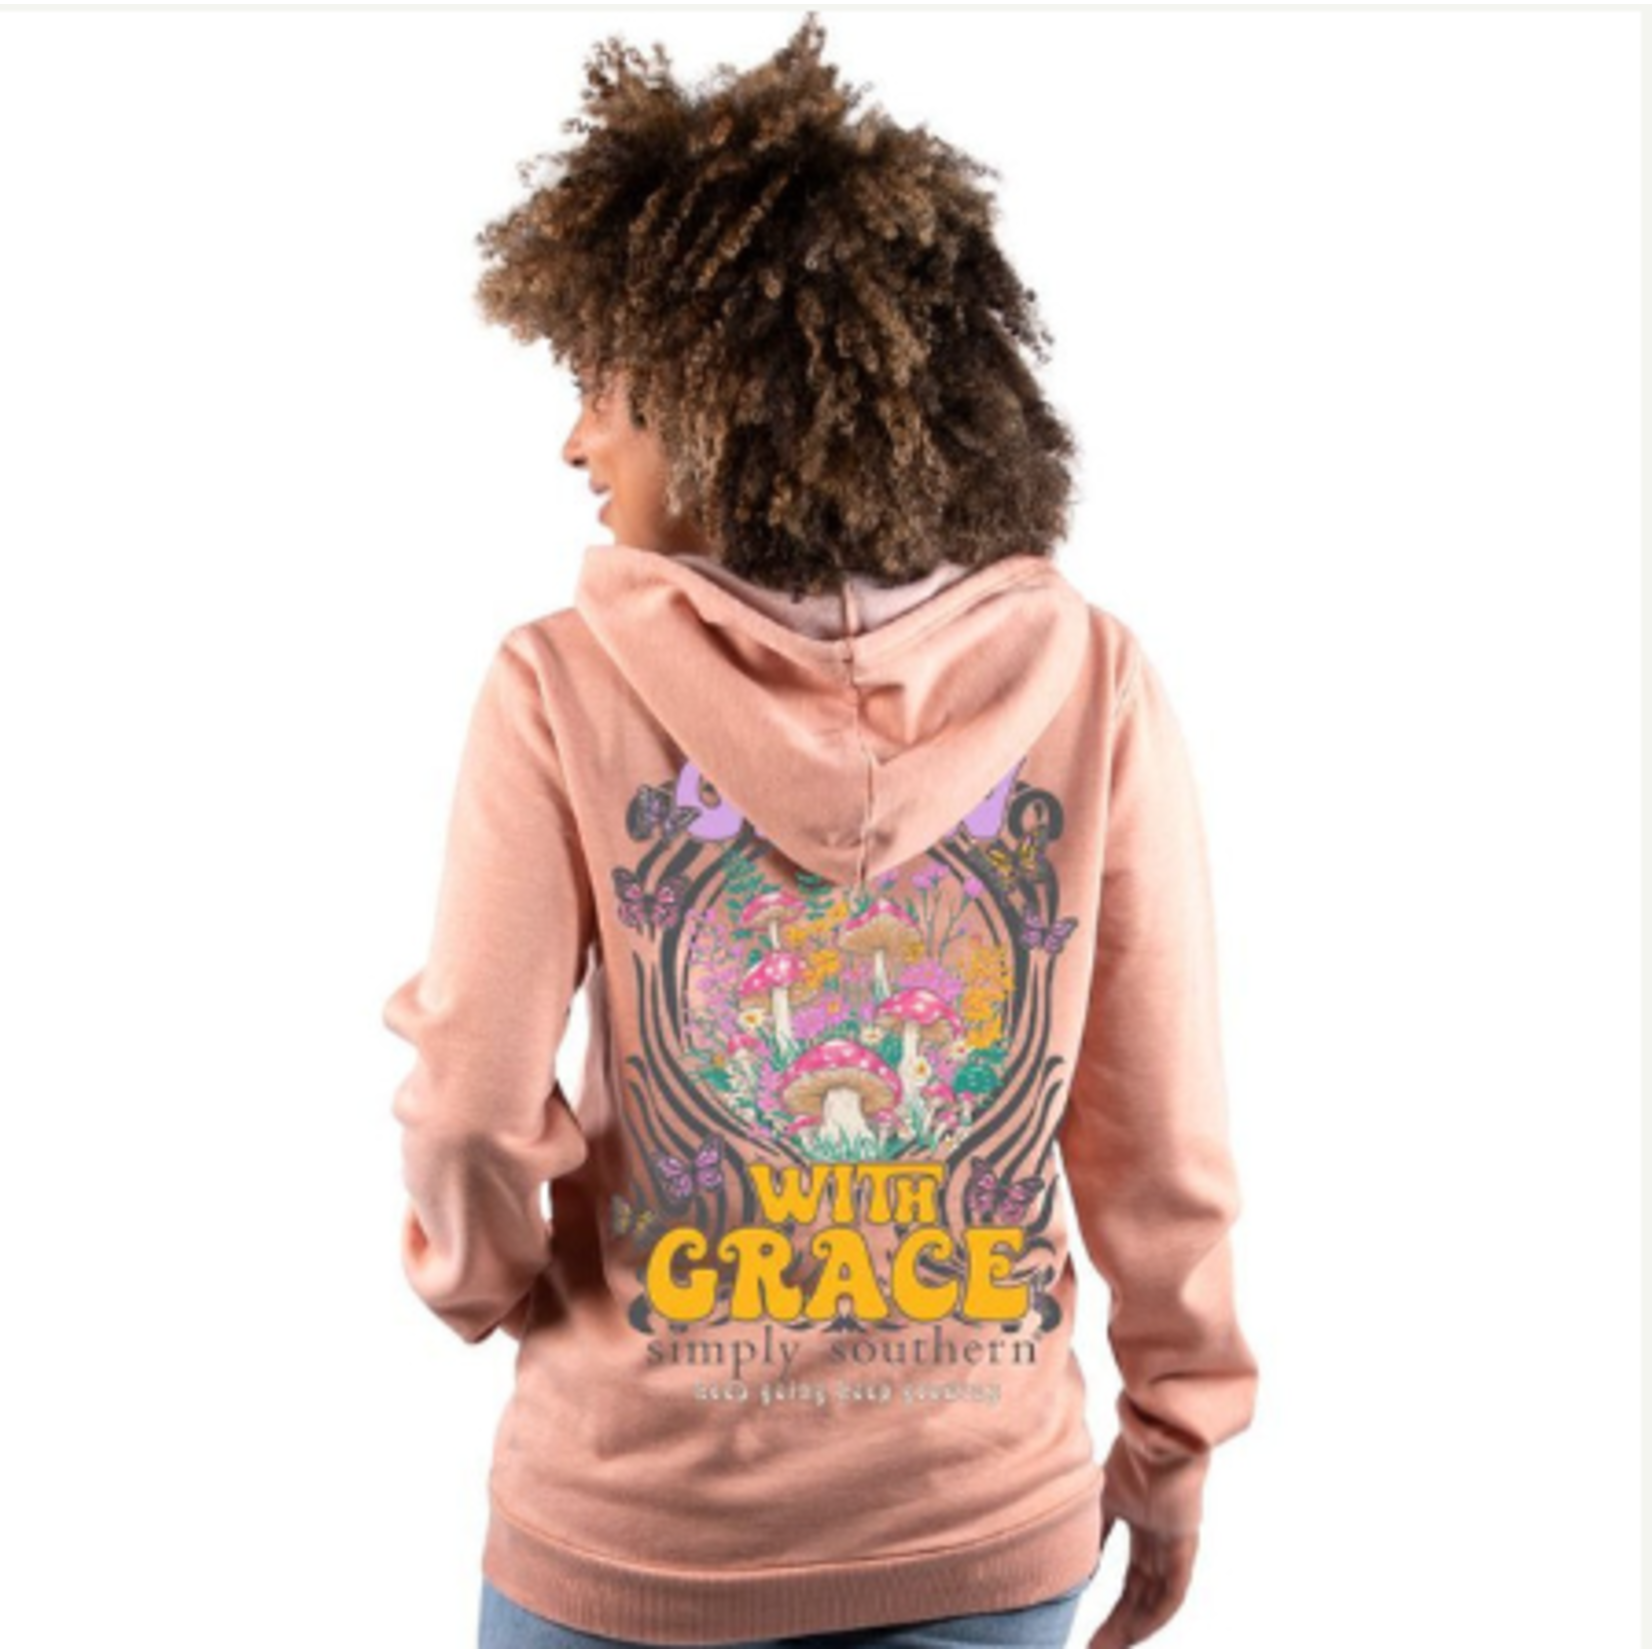 Simply Southern Simply Southern Hoodie Grace Peach